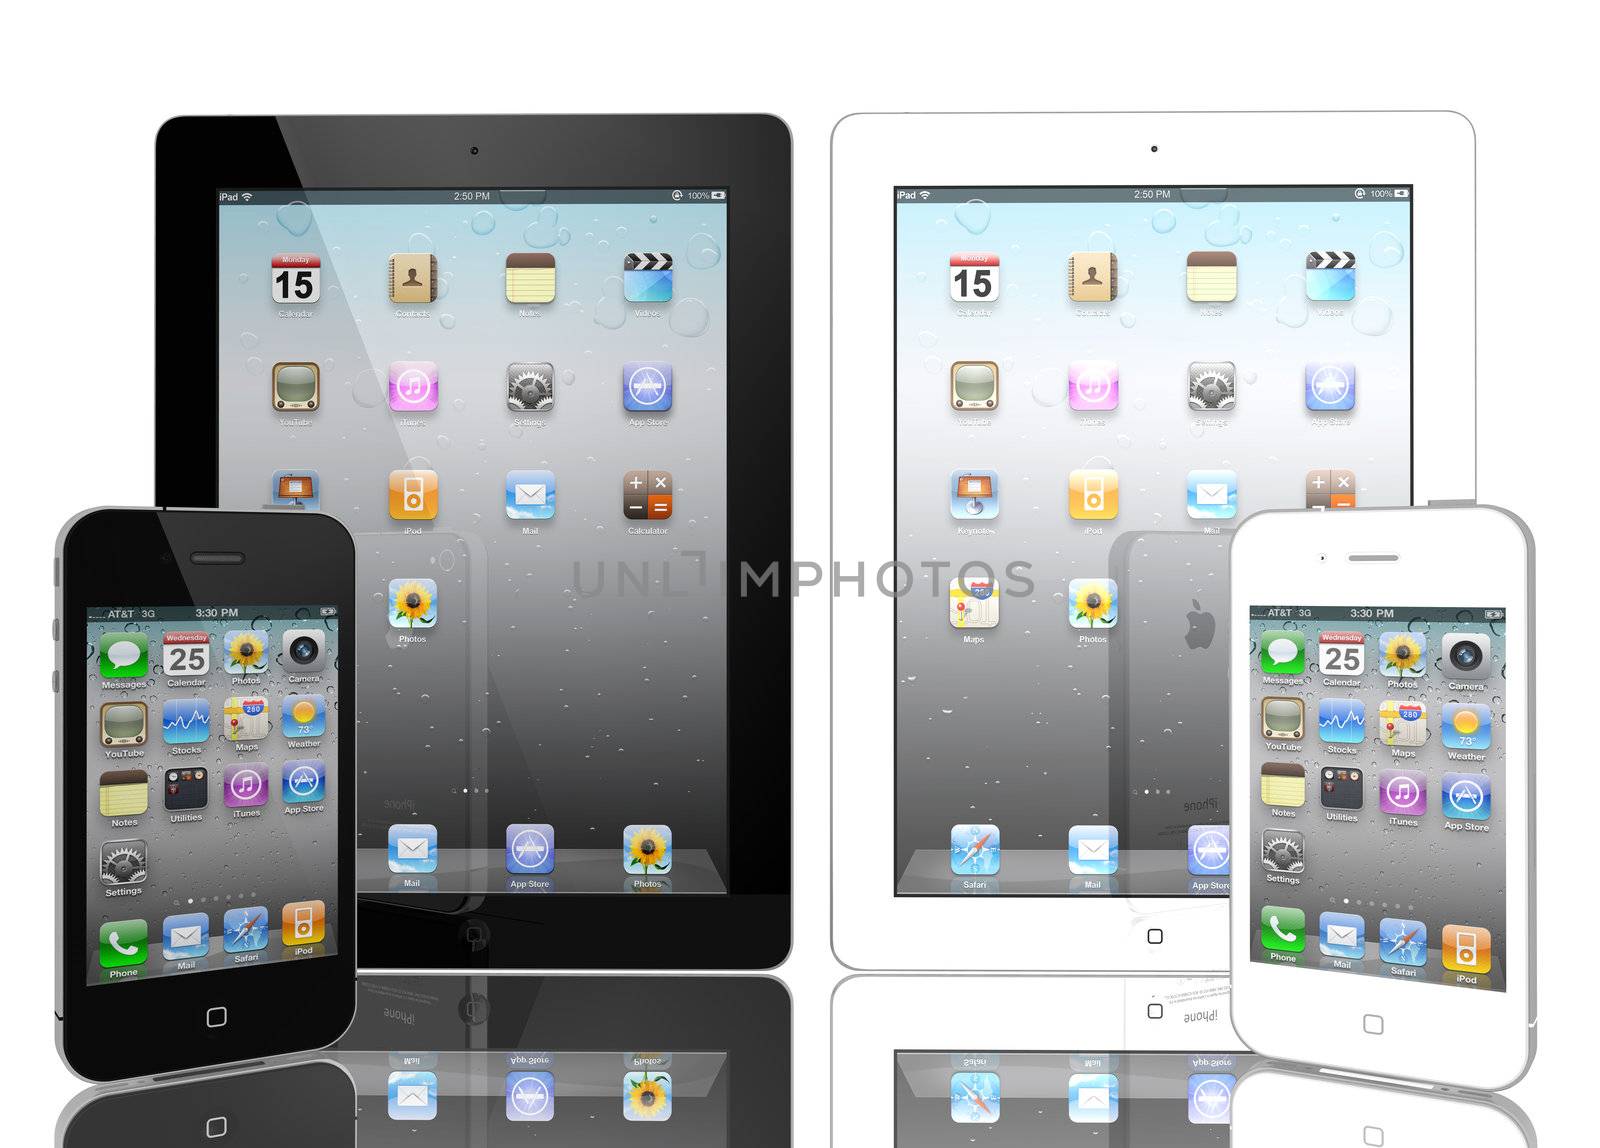 Apple iPad 2 and iPhone 4s black and white